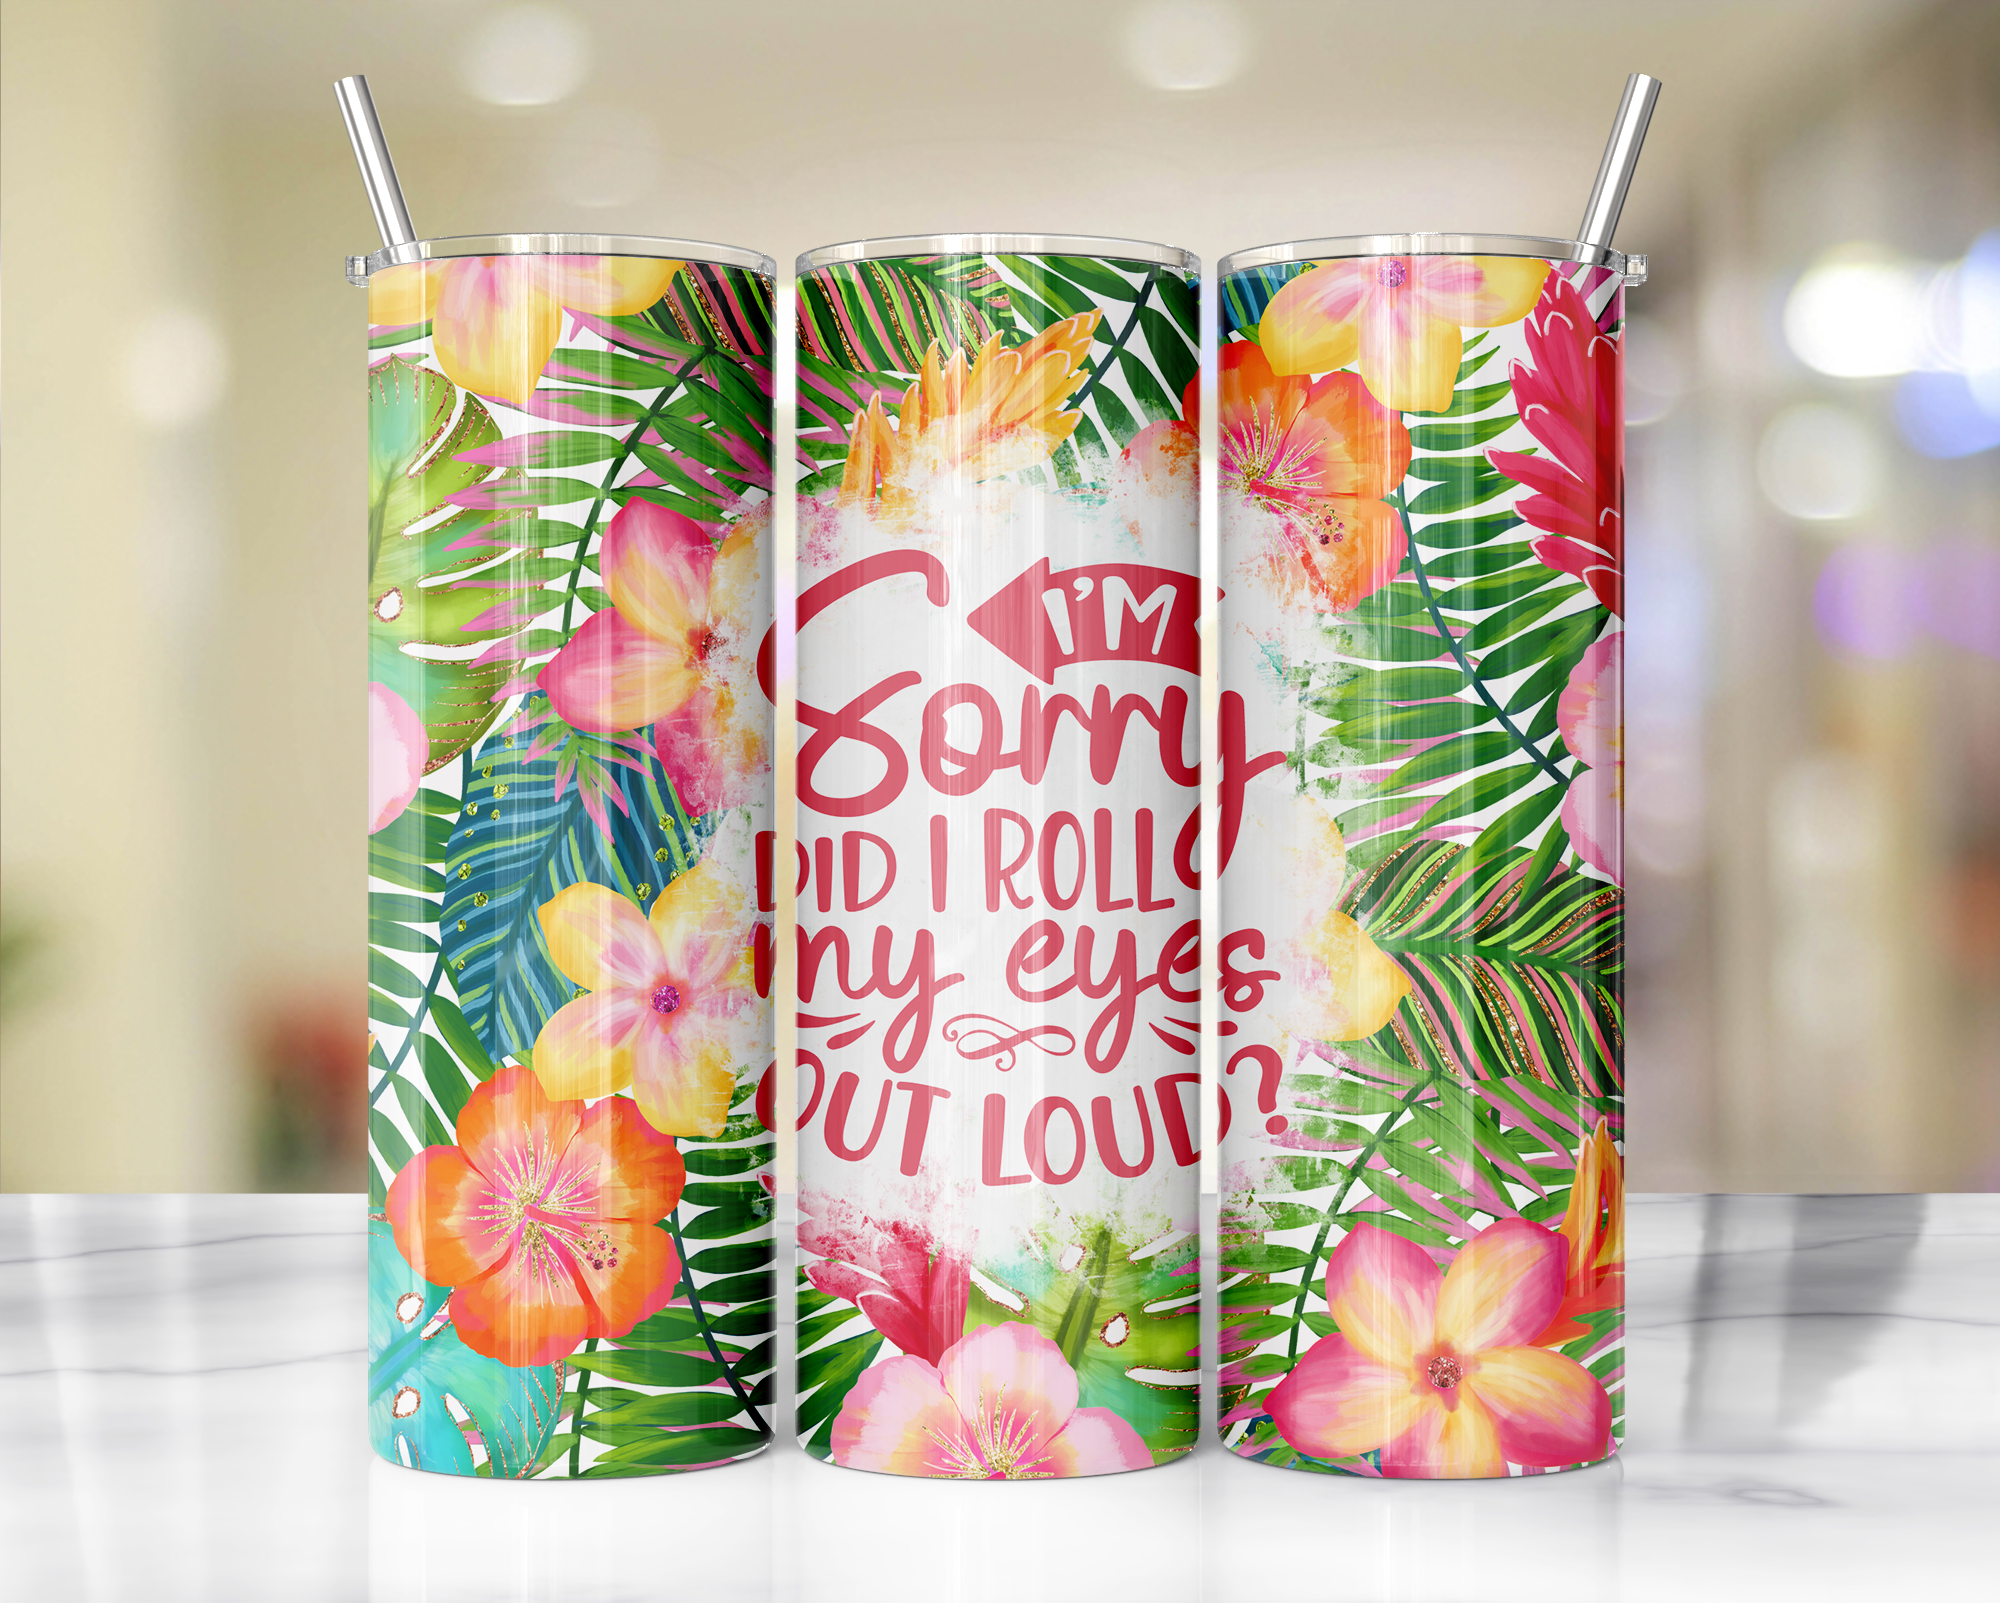 'Im sorry did I roll my eyes out loud' Floral Tumbler 20oz or 30oz